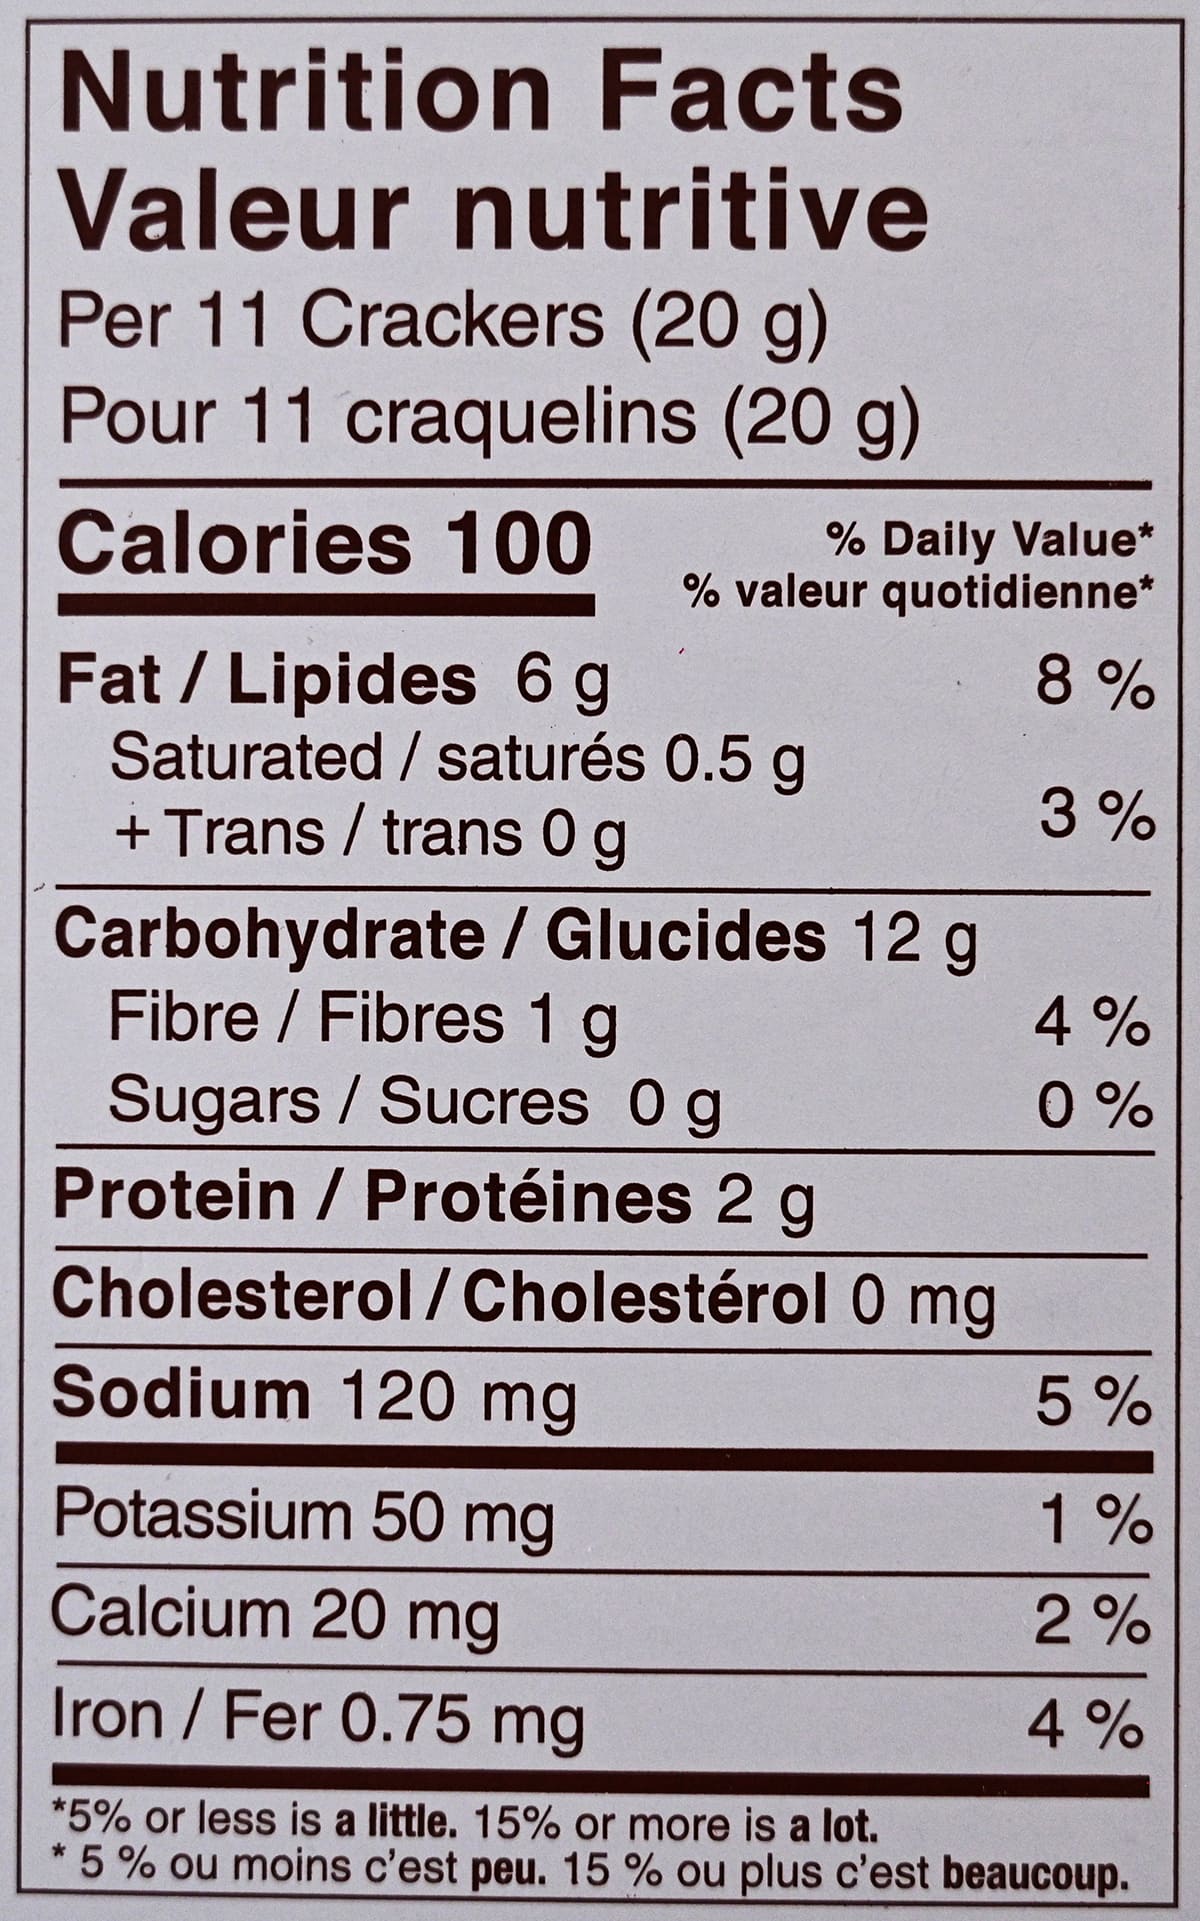 Image of the nutrition facts for the crackers from the back of the box.